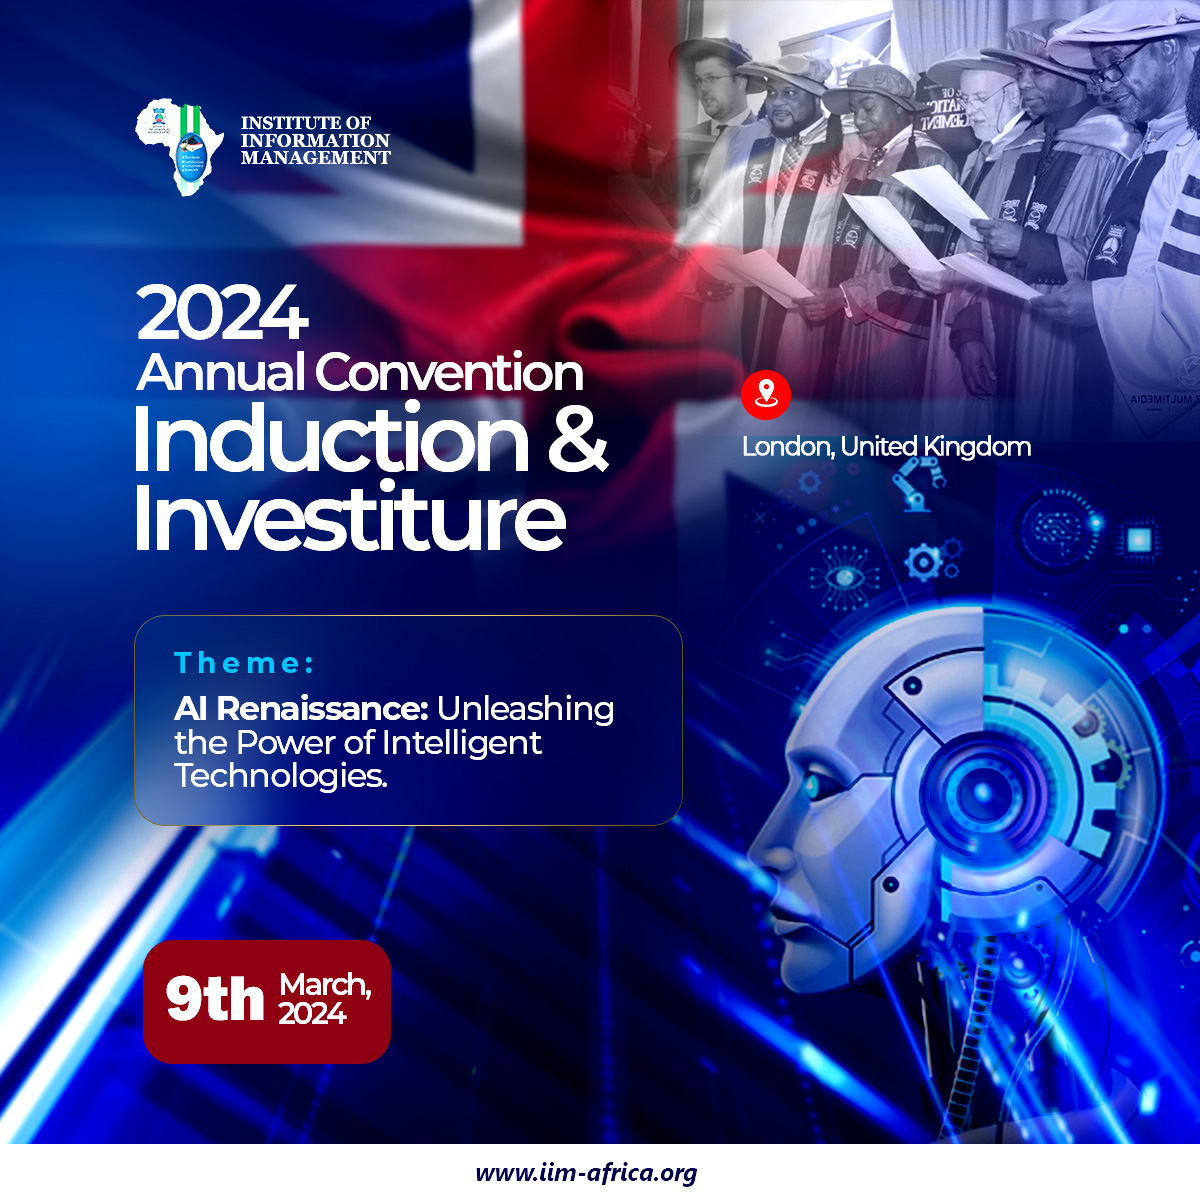 2024 United Kingdom Annual Convention, Induction & Investiture